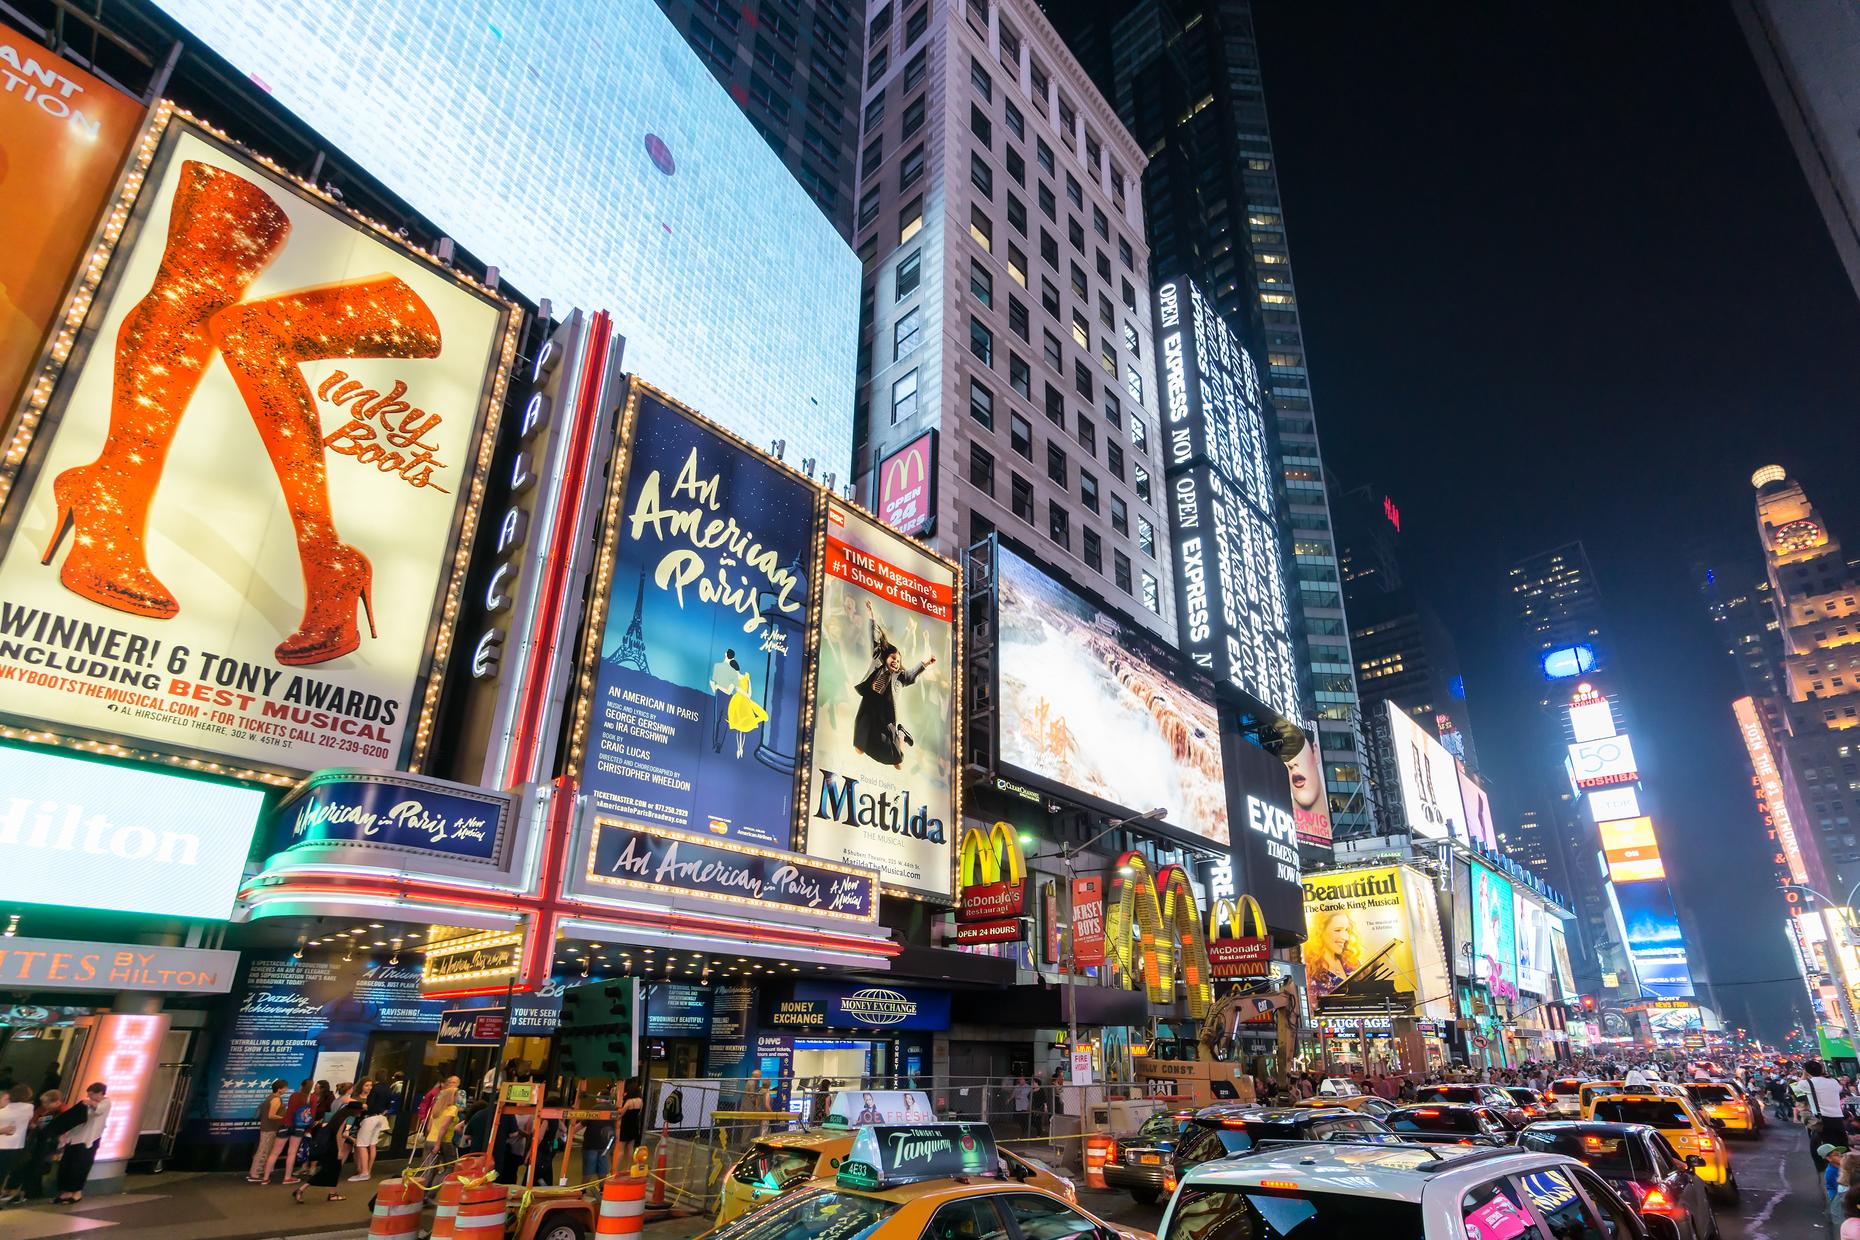 Putting it Together: The Art of Adaptation on Broadway